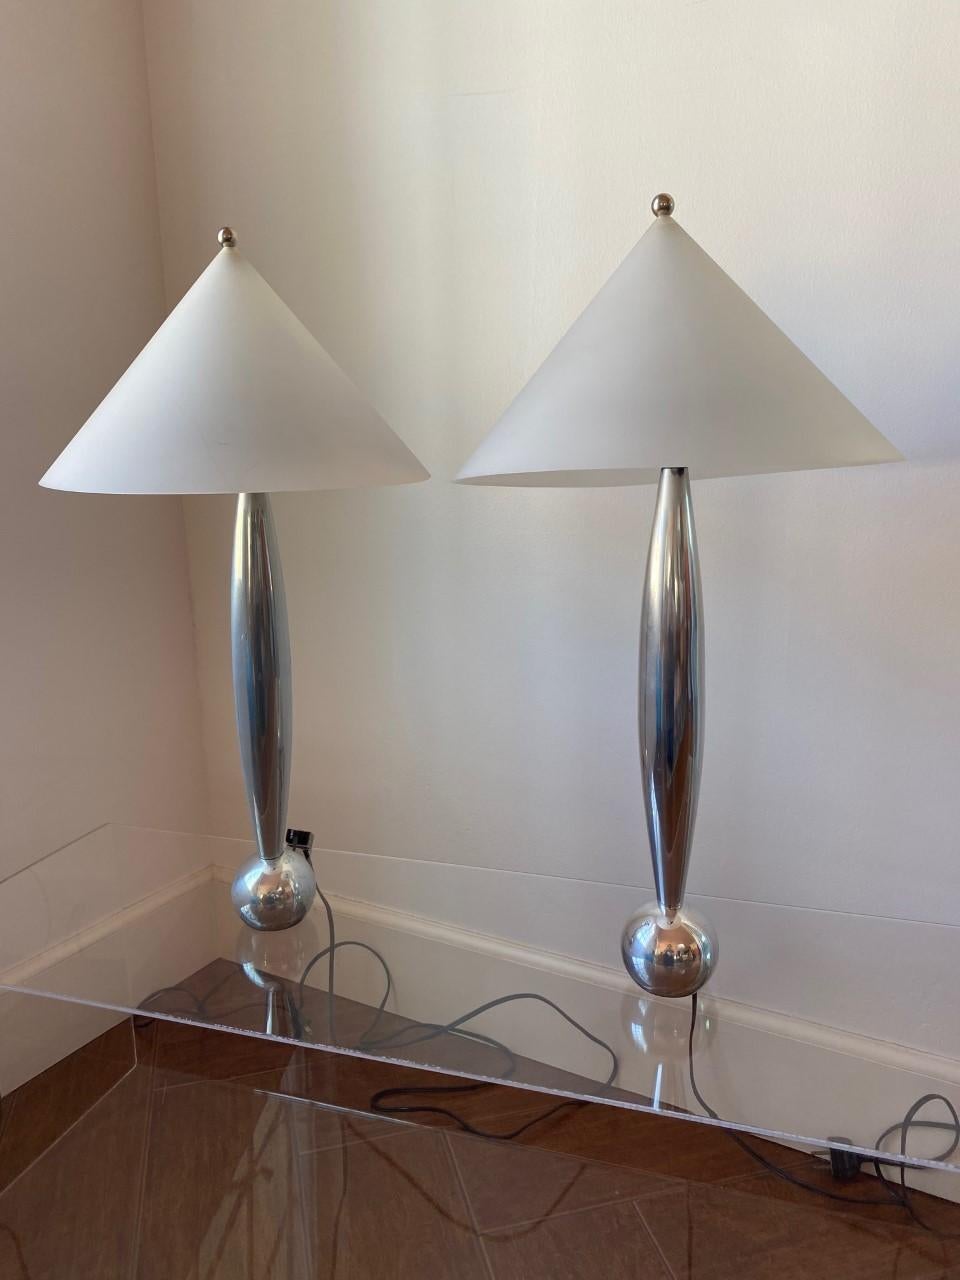 Vintage Space Age Pair of Aluminum Table Lamps, 1970s For Sale 3